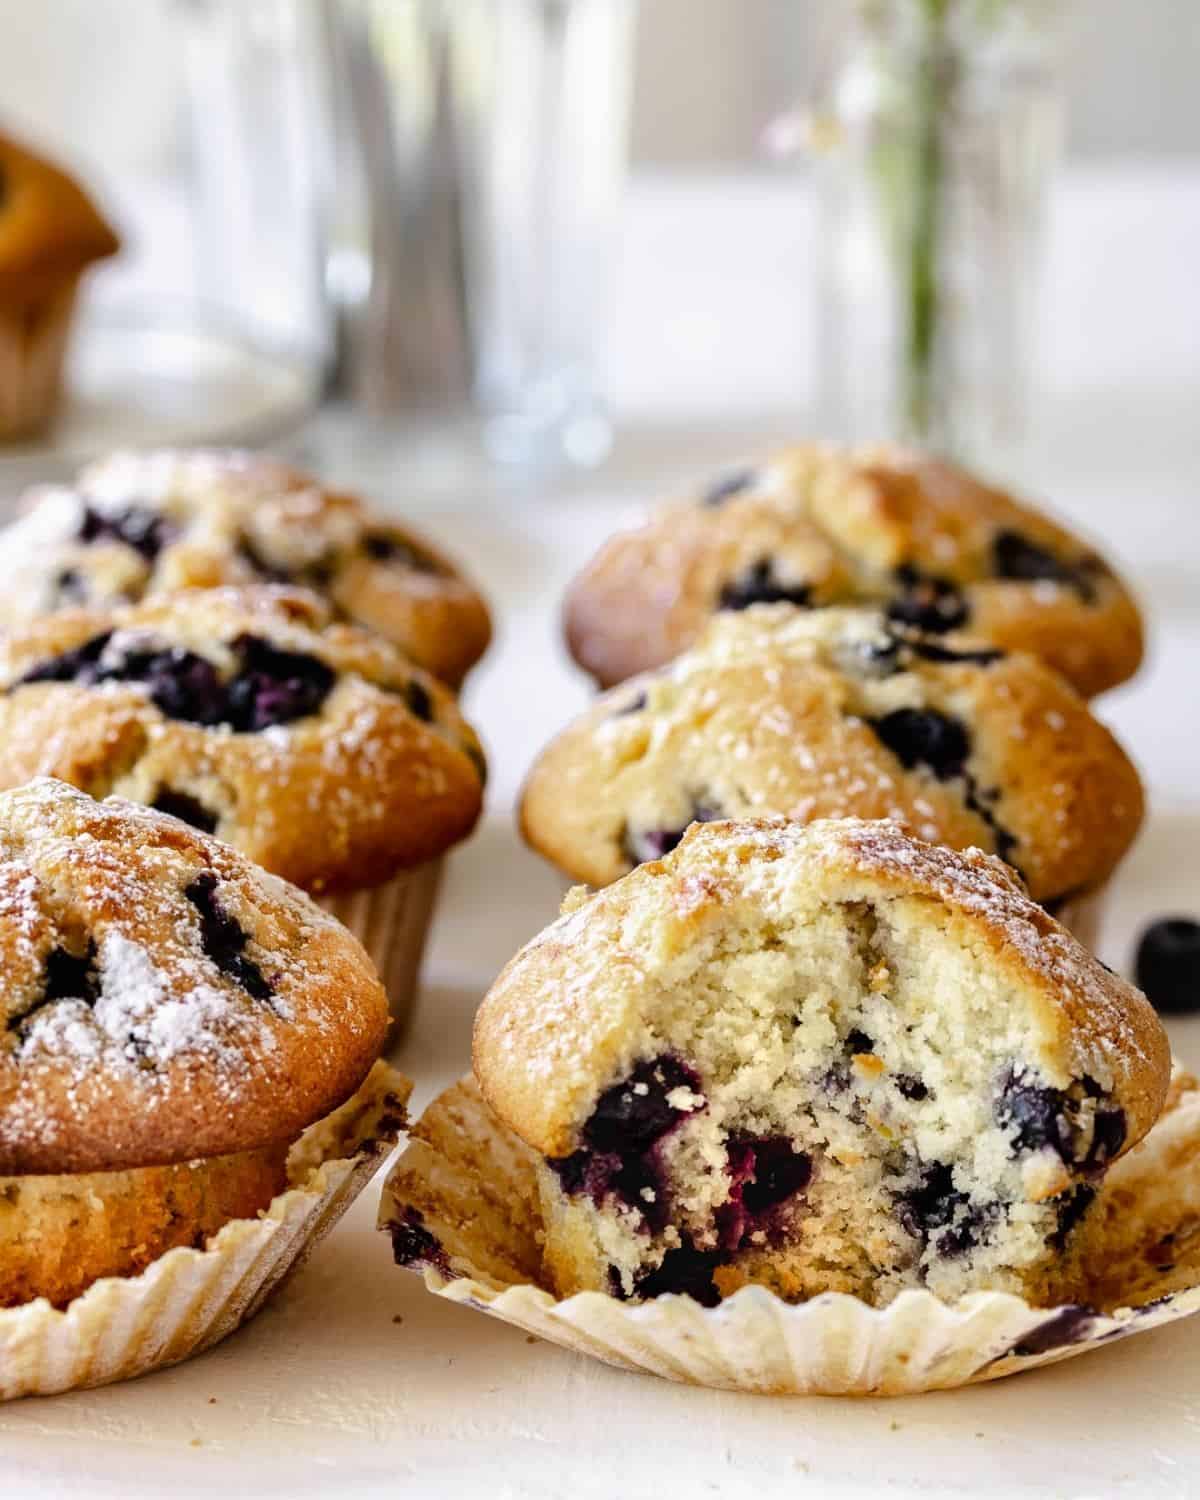 Front view of Blueberry Muffins. A muffin is open and blueberries can be seen inside